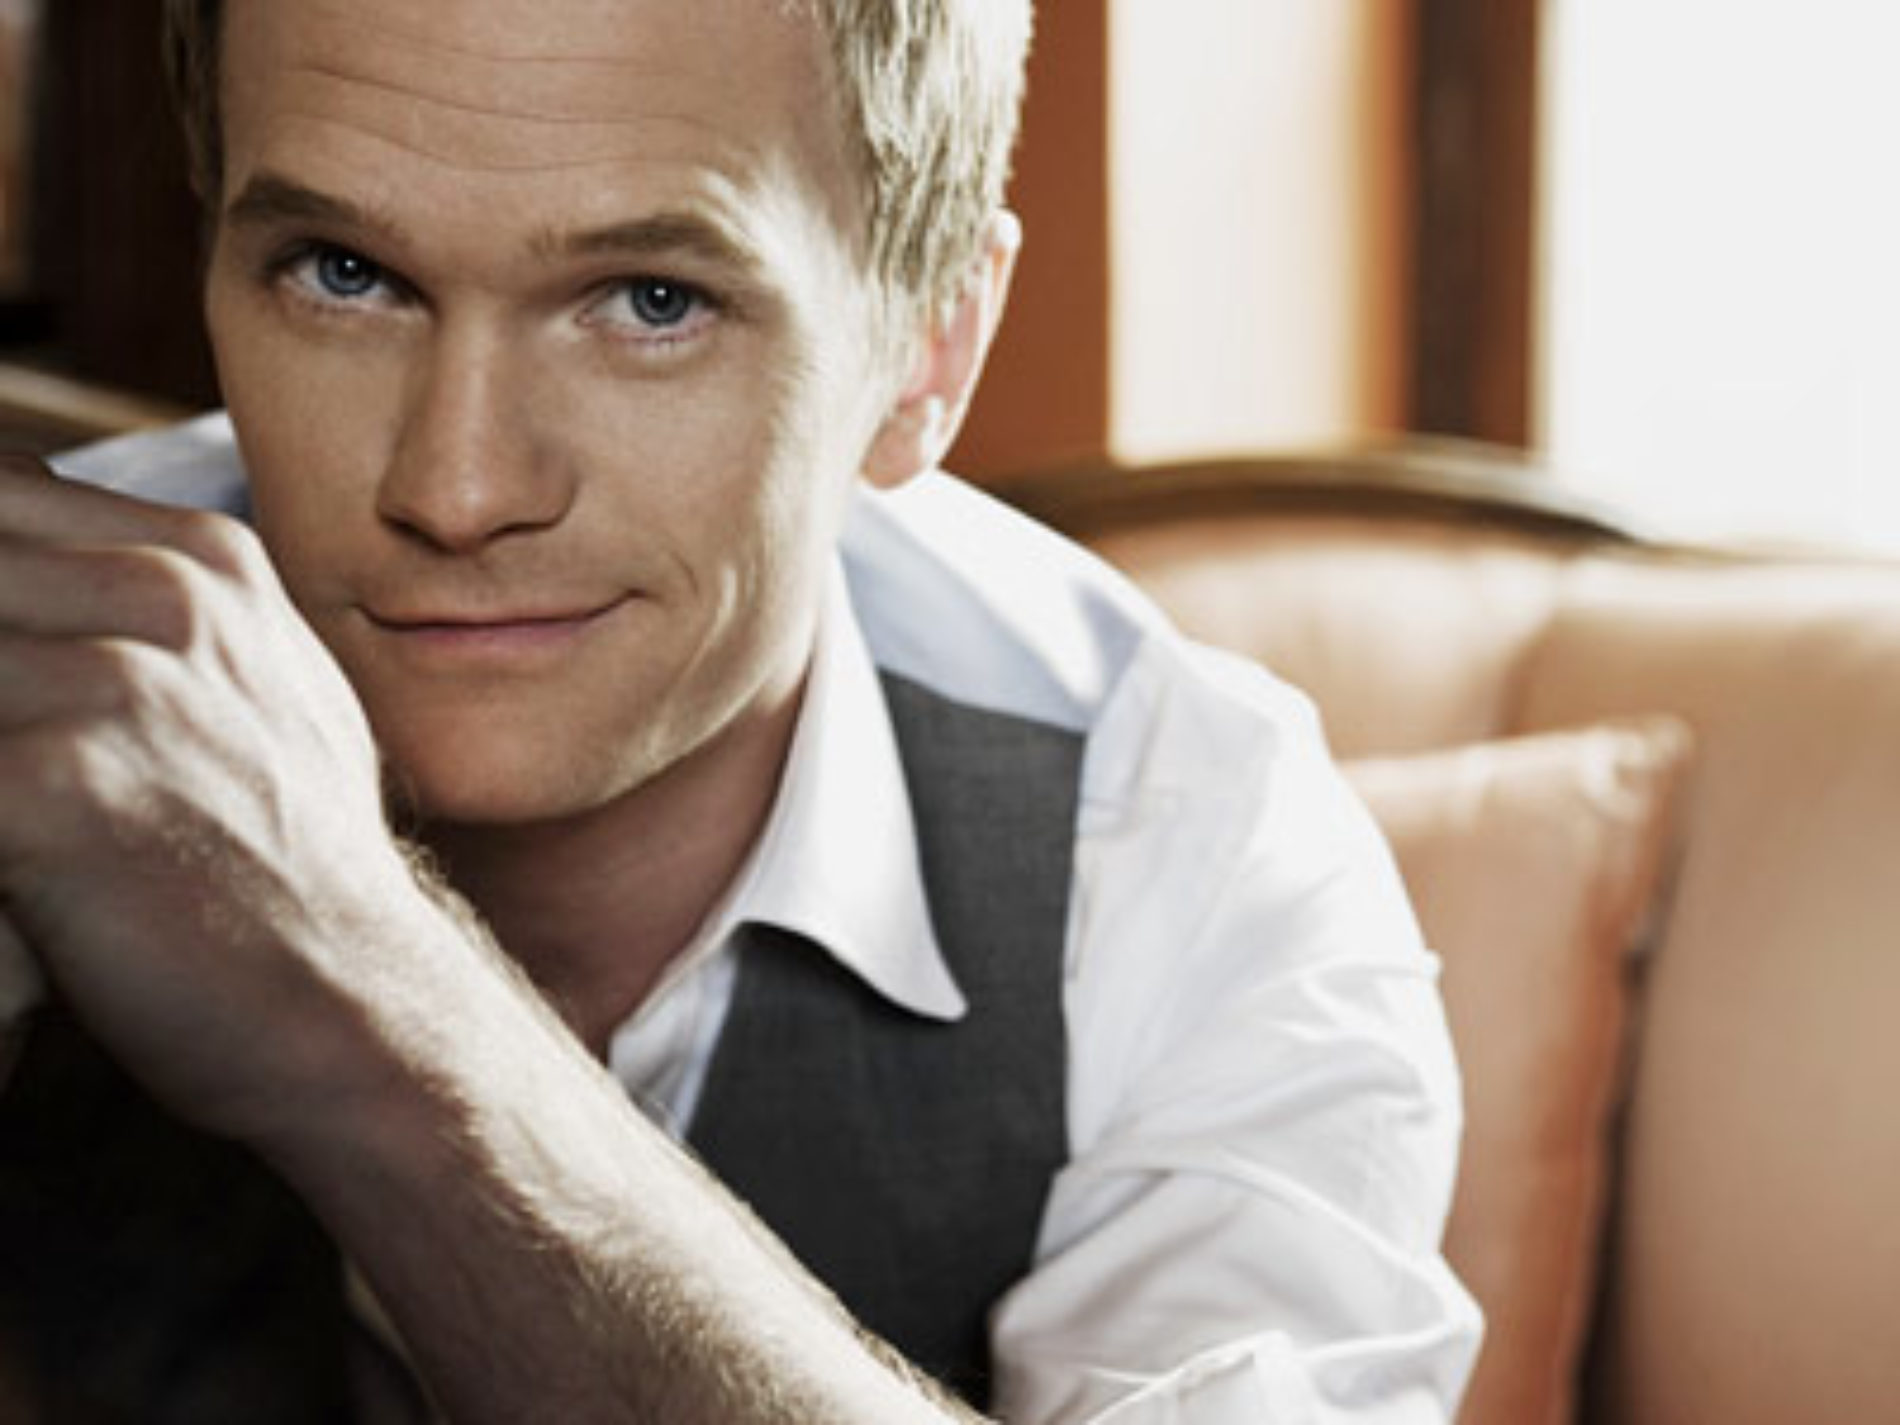 Neil Patrick Harris To Be People Magazine’s First Openly Gay “Sexiest Man Of The Year”?